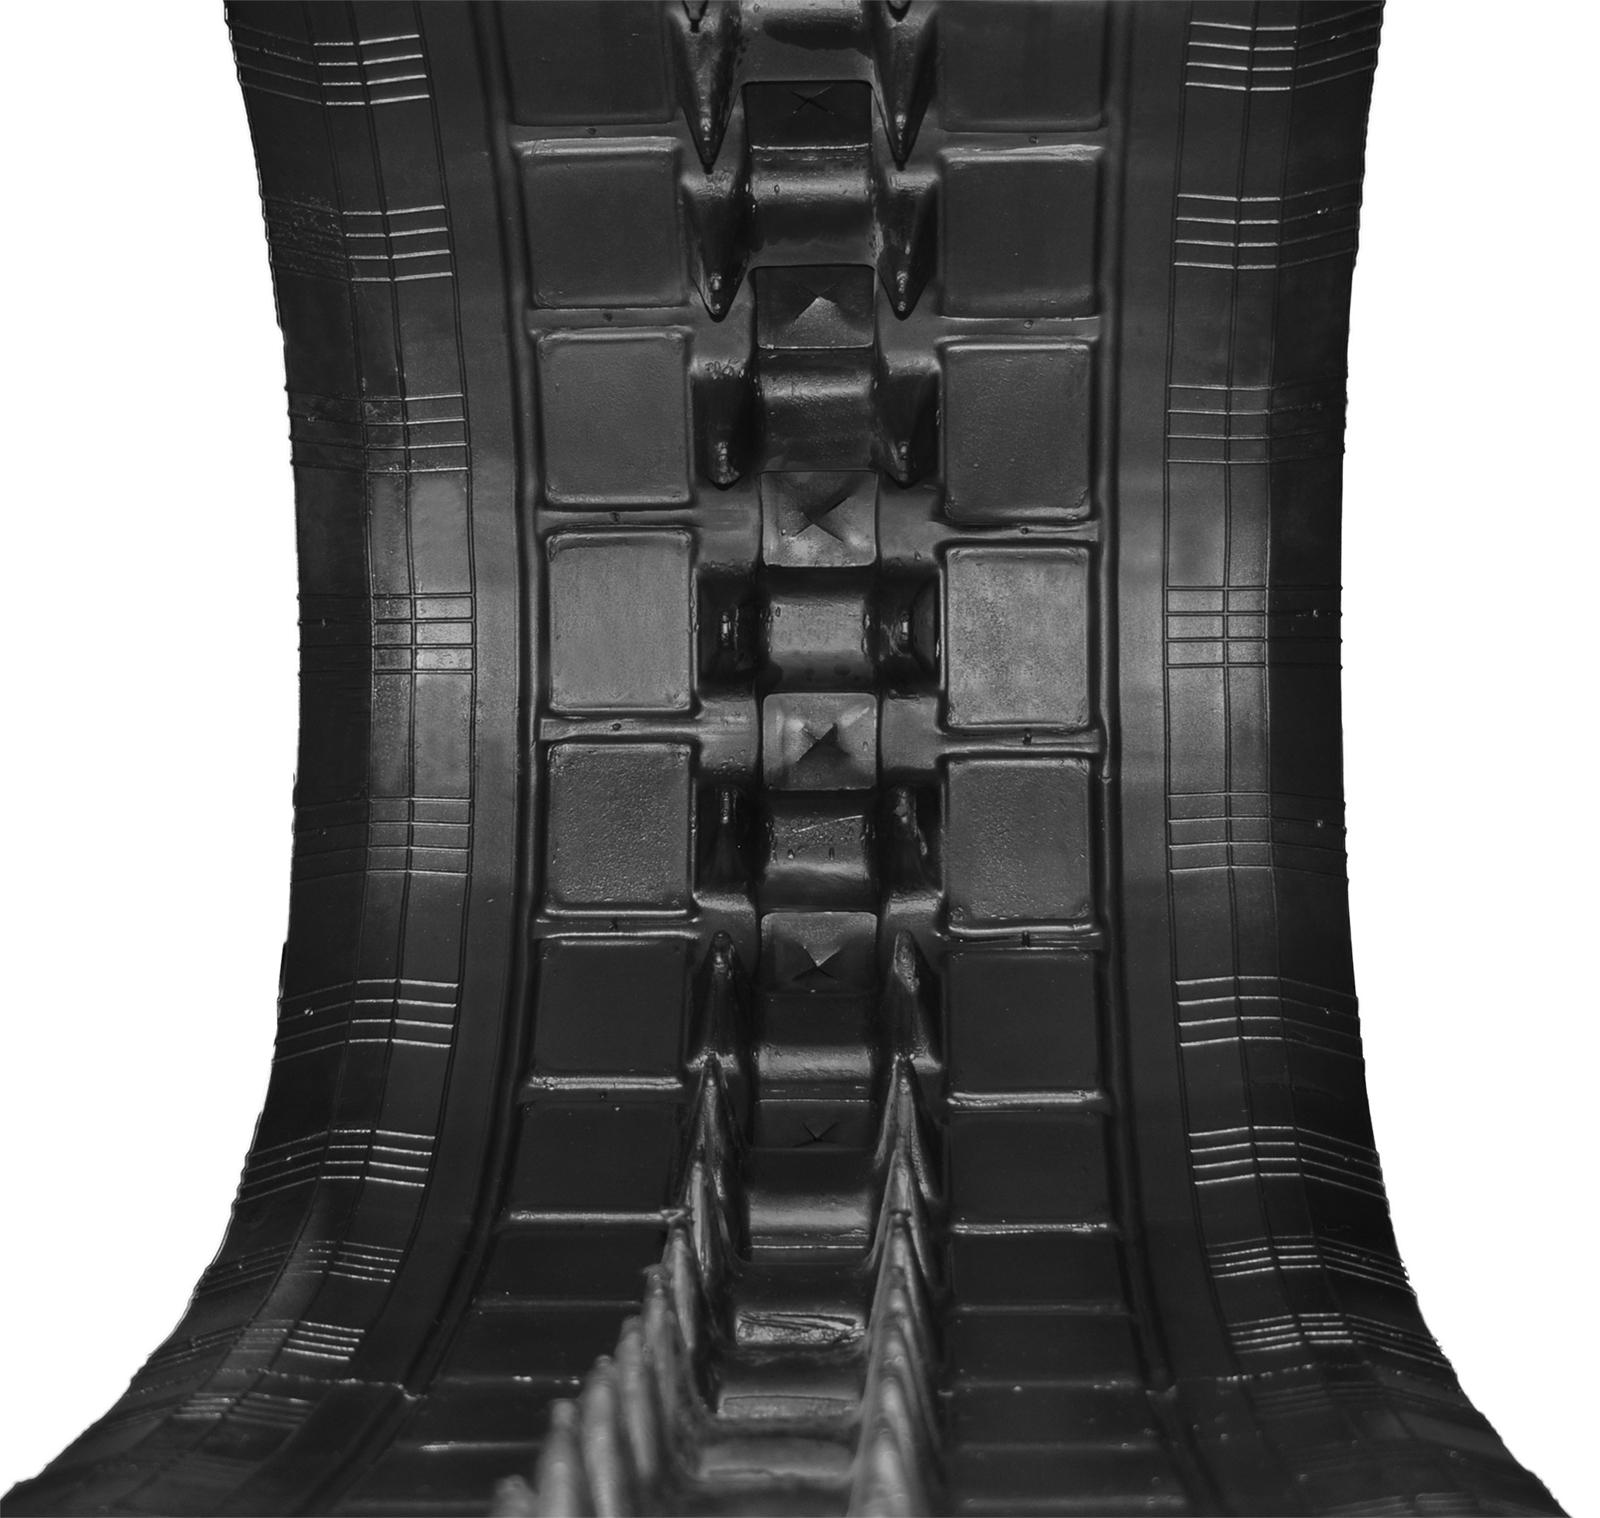 set of 2 18" camso extreme duty hxd pattern rubber tracks (450x100x48)